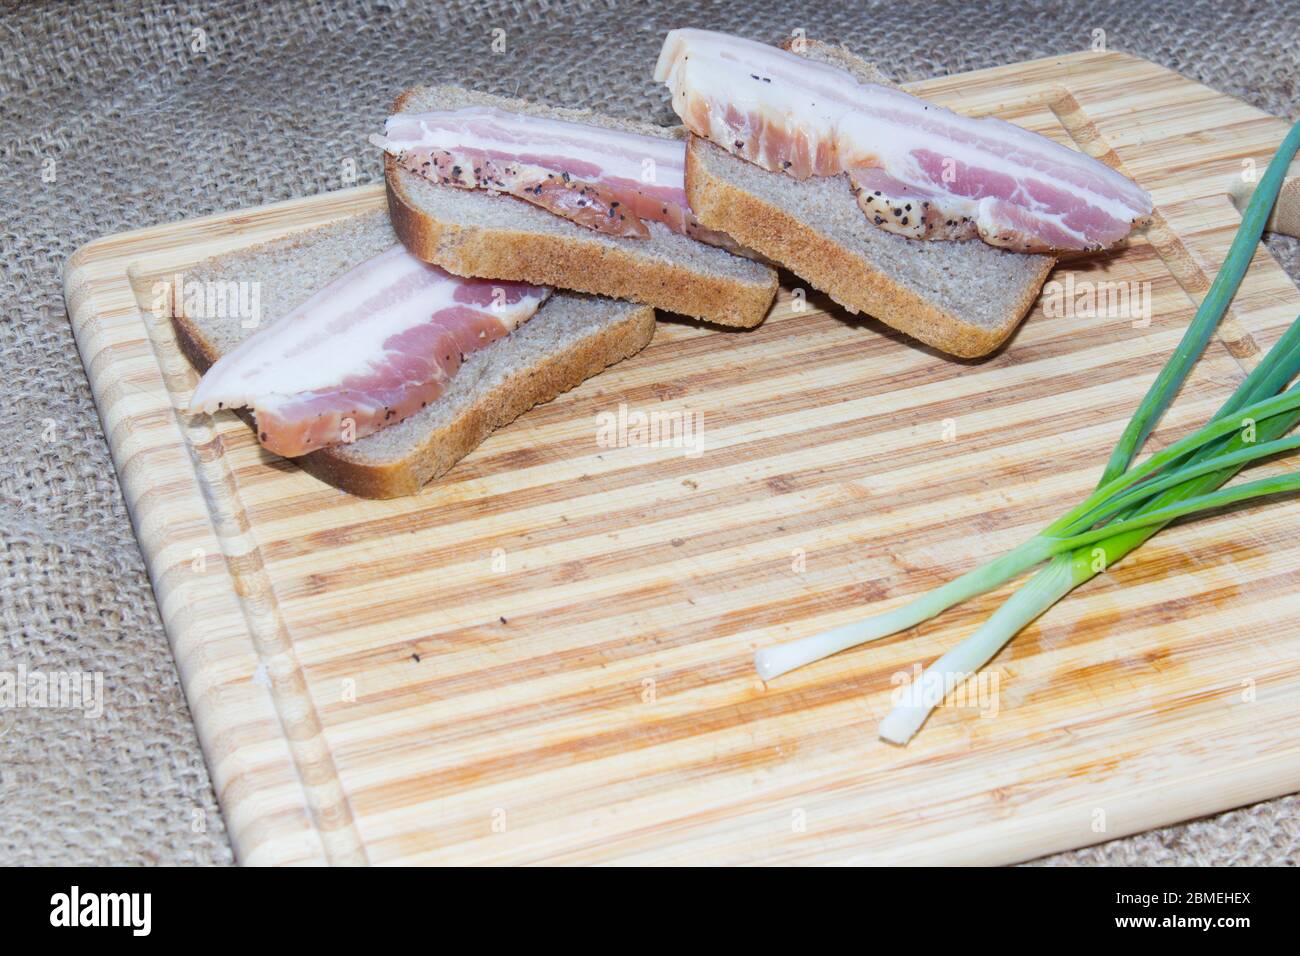 Smoked bacon, bread, green onion on a wooden cutting board Stock Photo